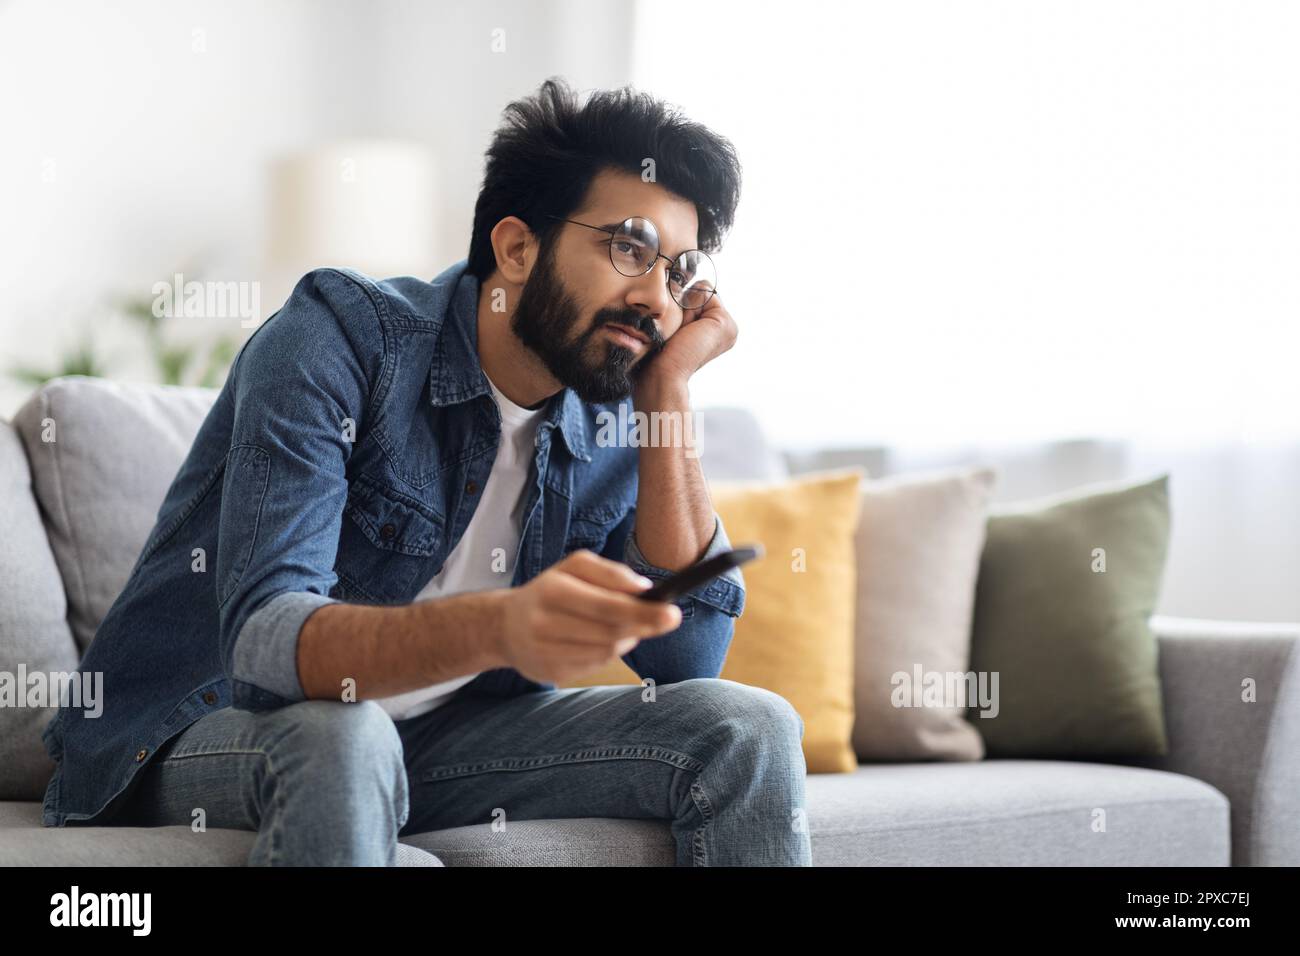 Boring Show. Portrait Of Upset Young Indian Guy Watching TV At Home, Stock Photo